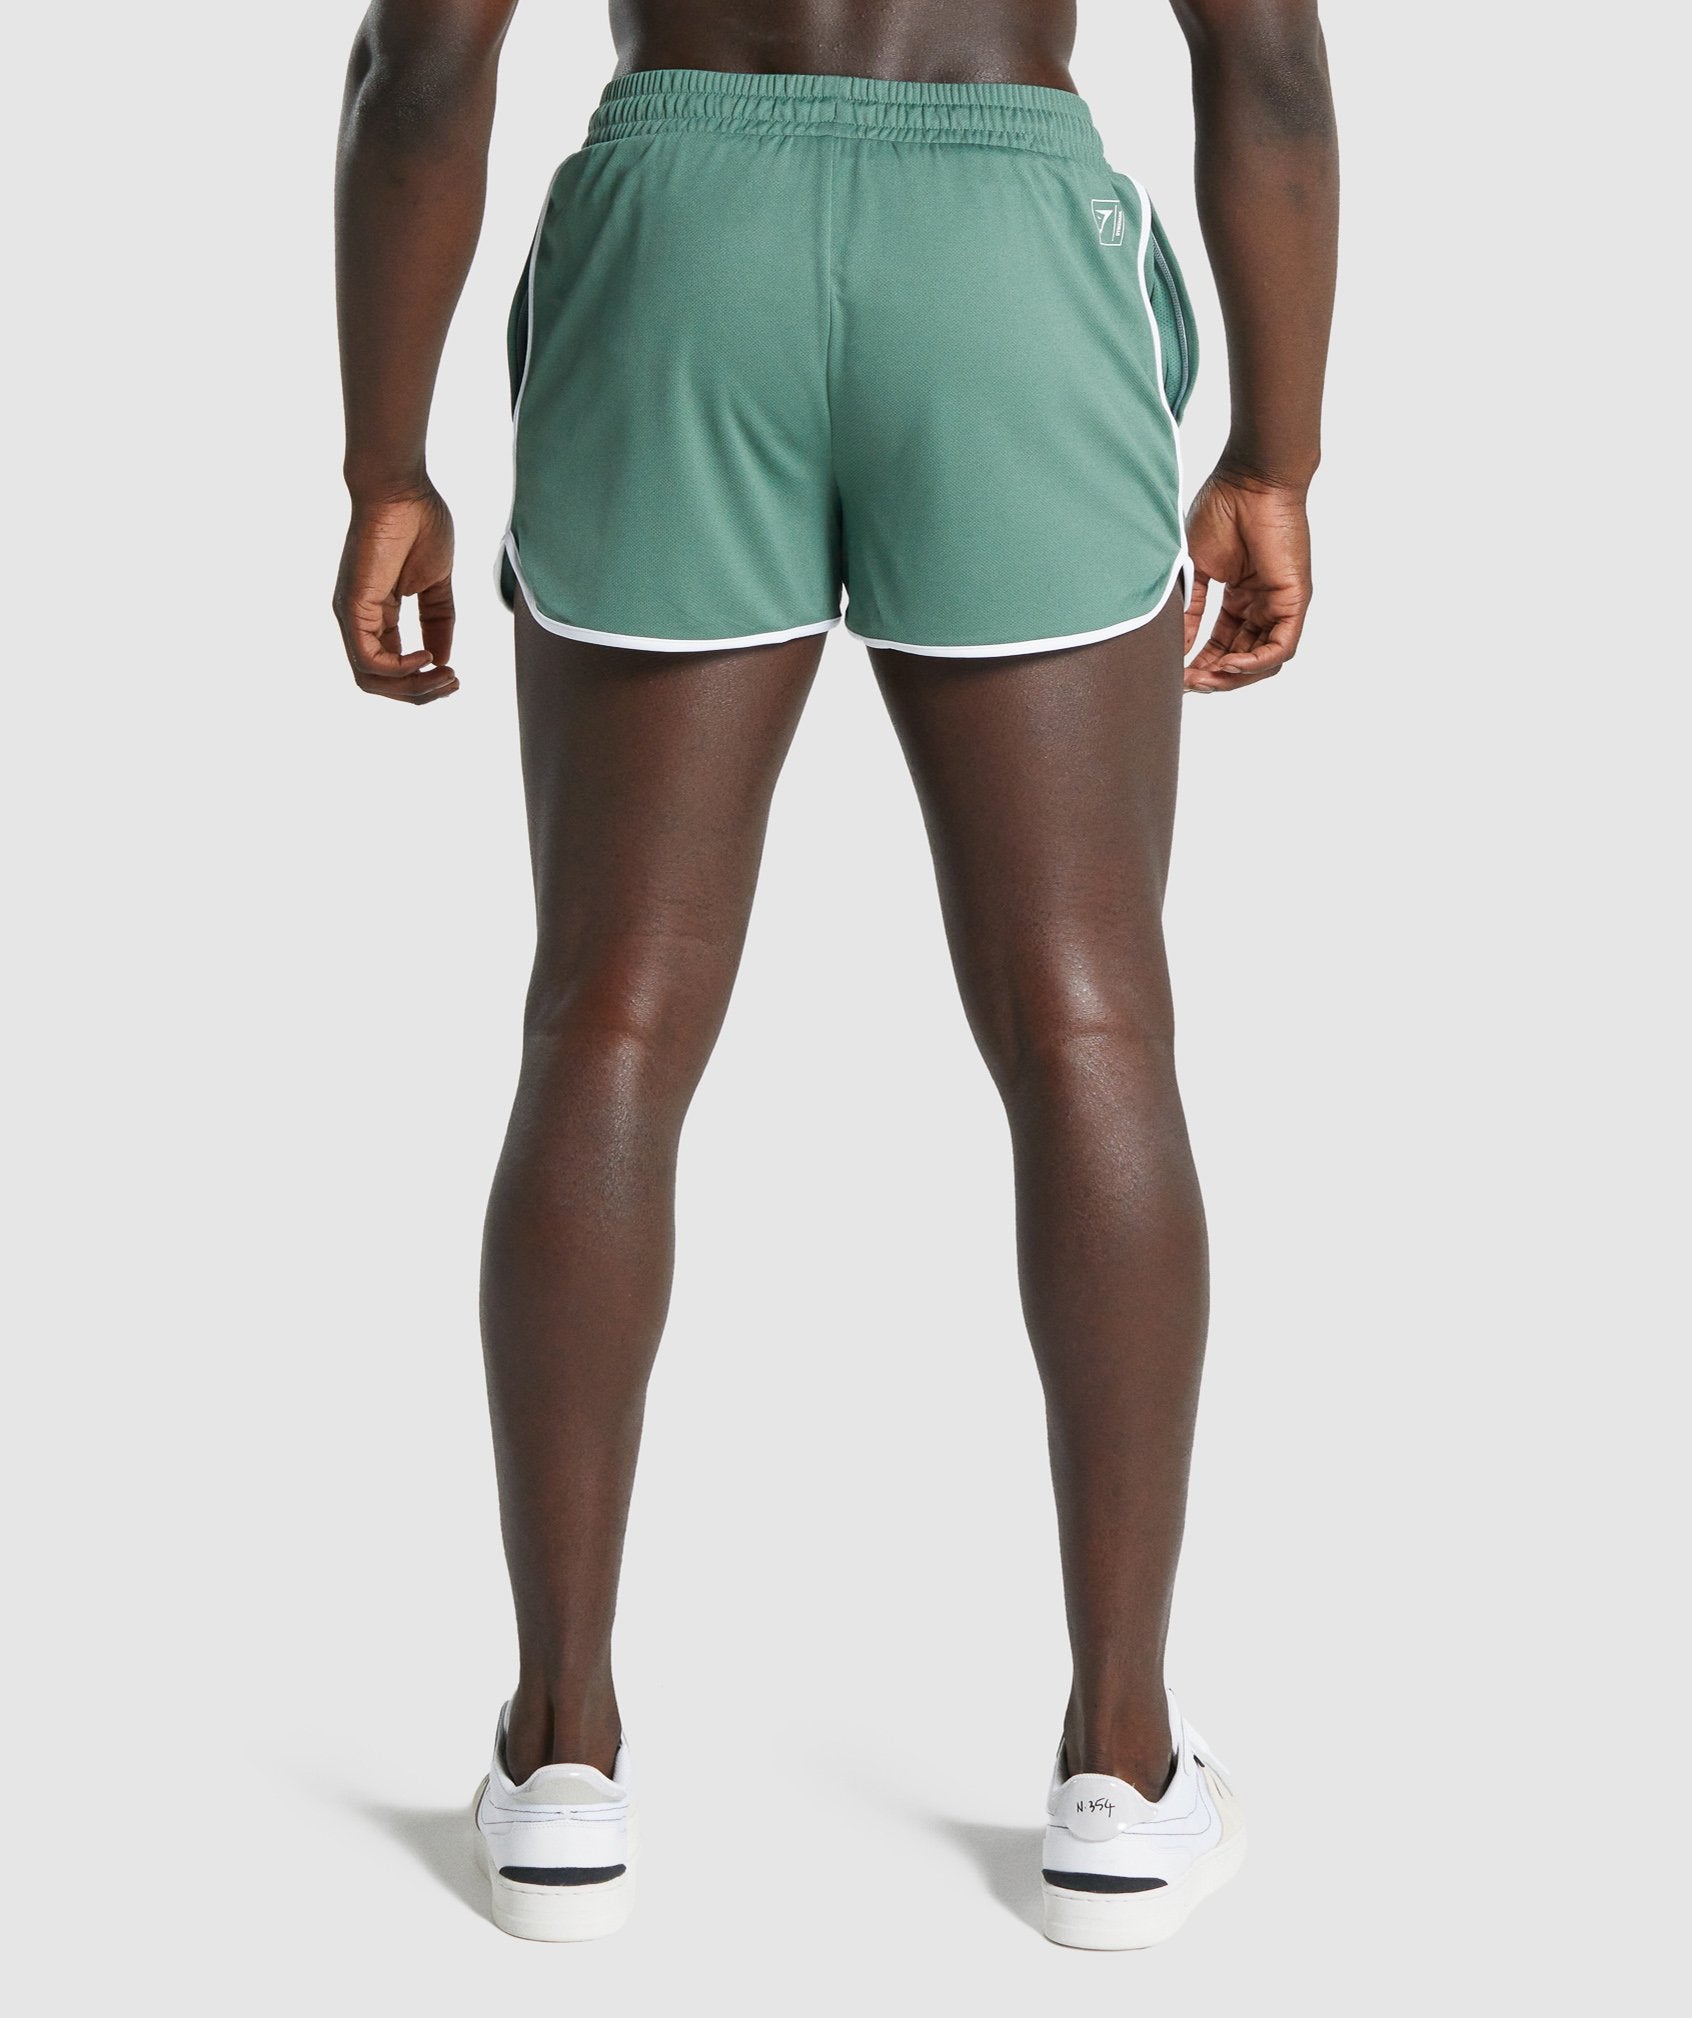 Recess 3" Quad Shorts in Green - view 3